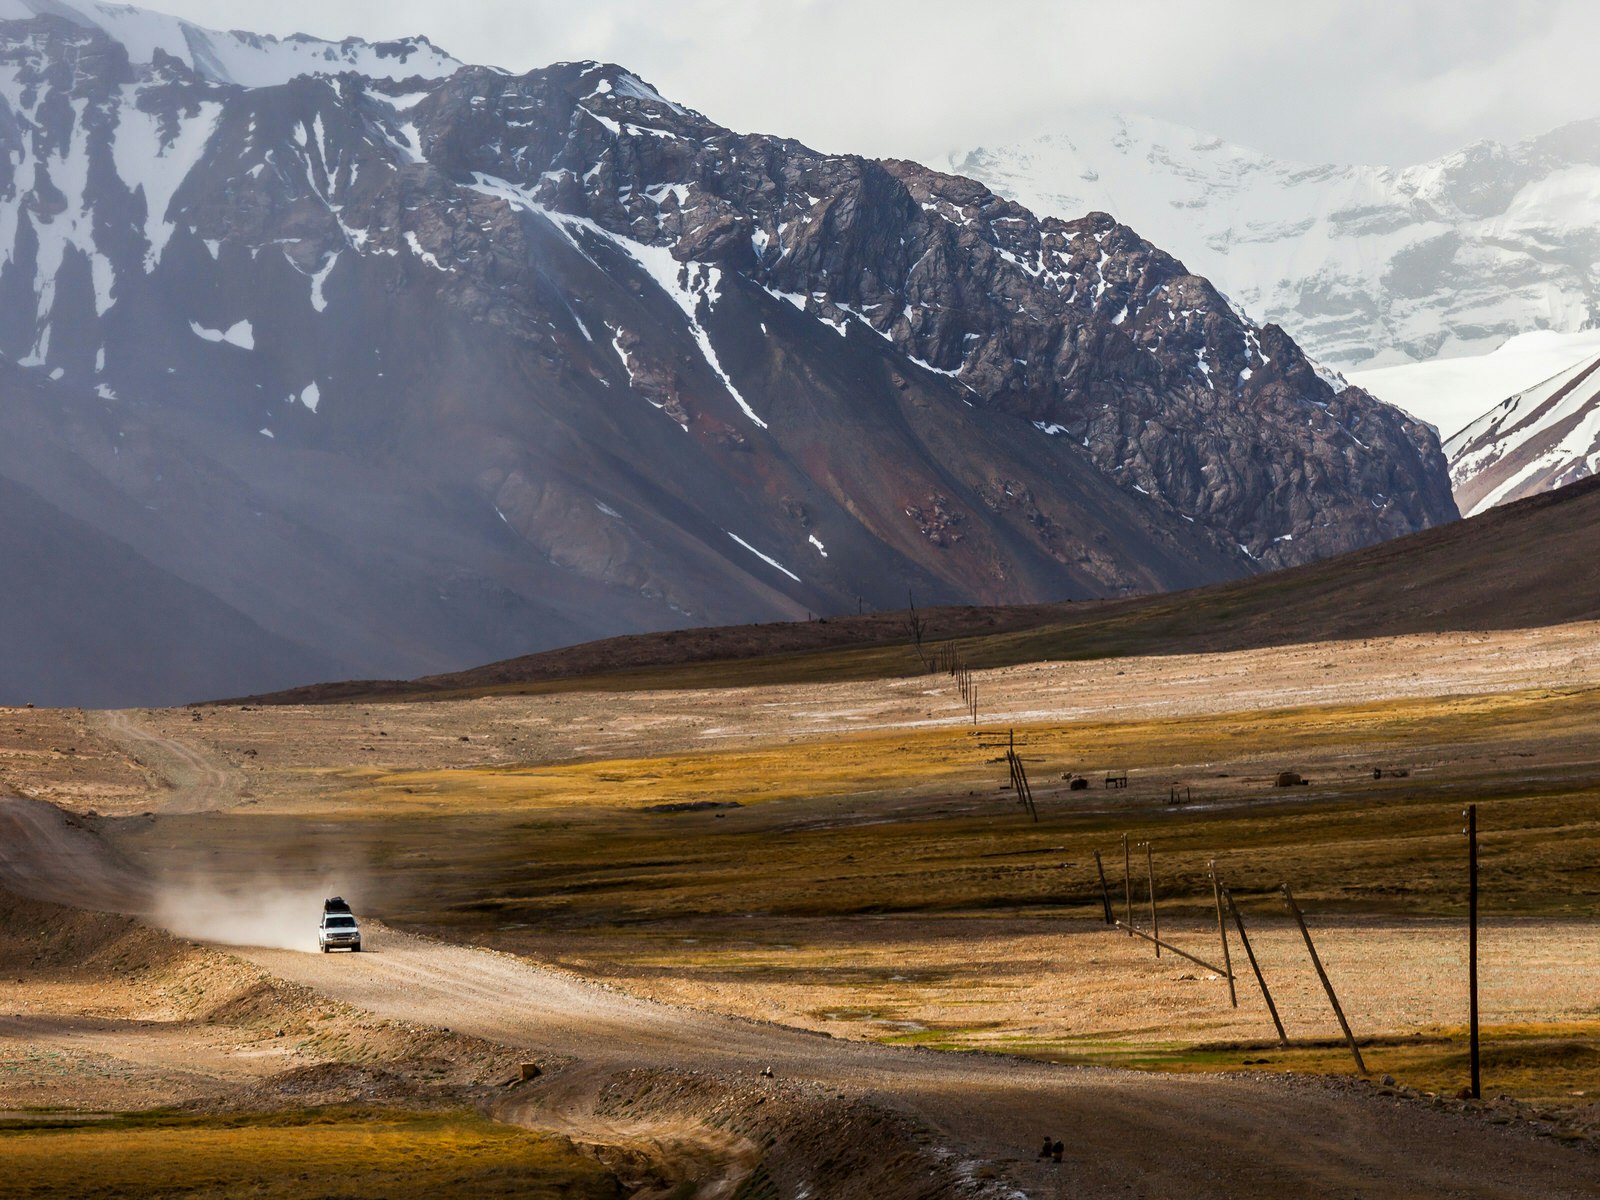 A 4WD drives down a dirt road through a valley surrounded by mountains. Chris's bucket list travel experience: a road trip down the Pamir Hwy through Tajikistan ©NOWAK LUKASZ/Shutterstock